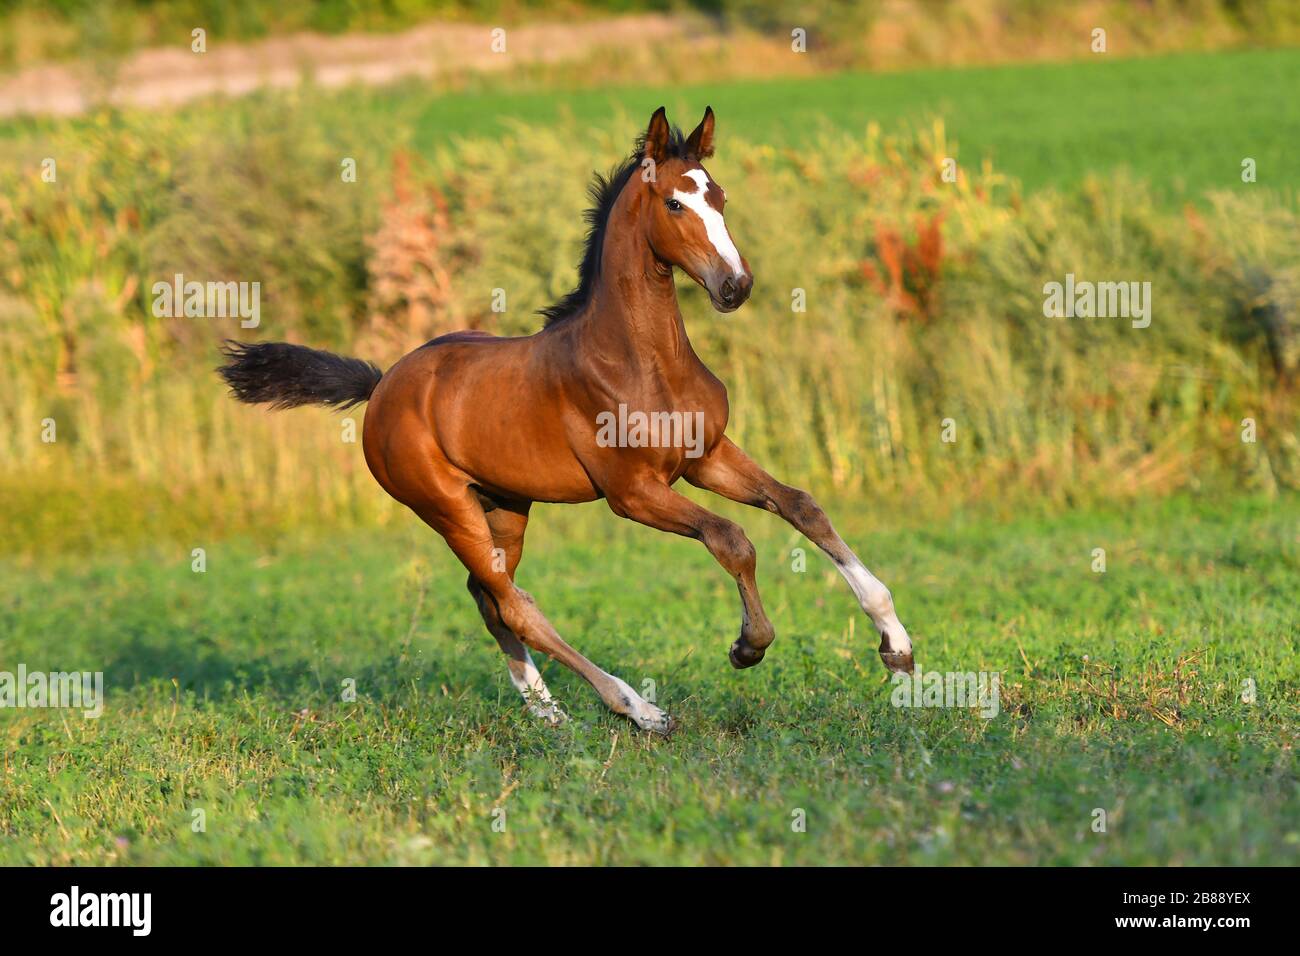 Bay foal with large white blaze running in gallop around field. Stock Photo